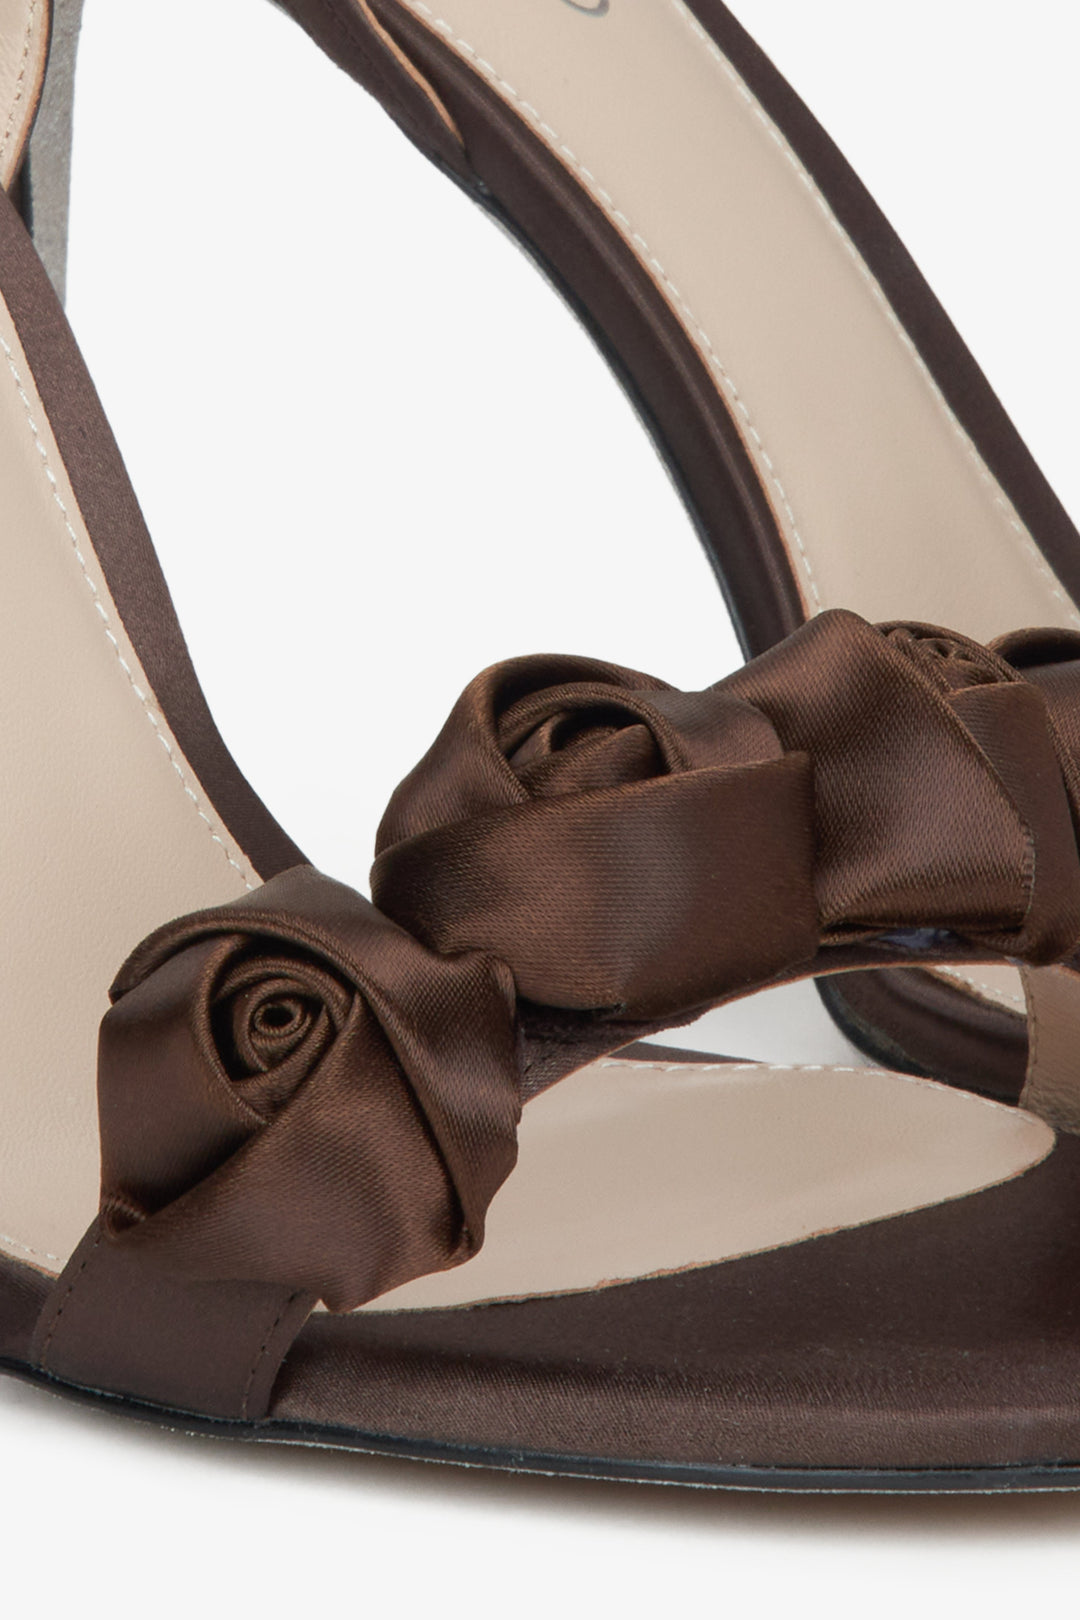 Women's dark brown high-heeled sandals - close-up on the ornament.